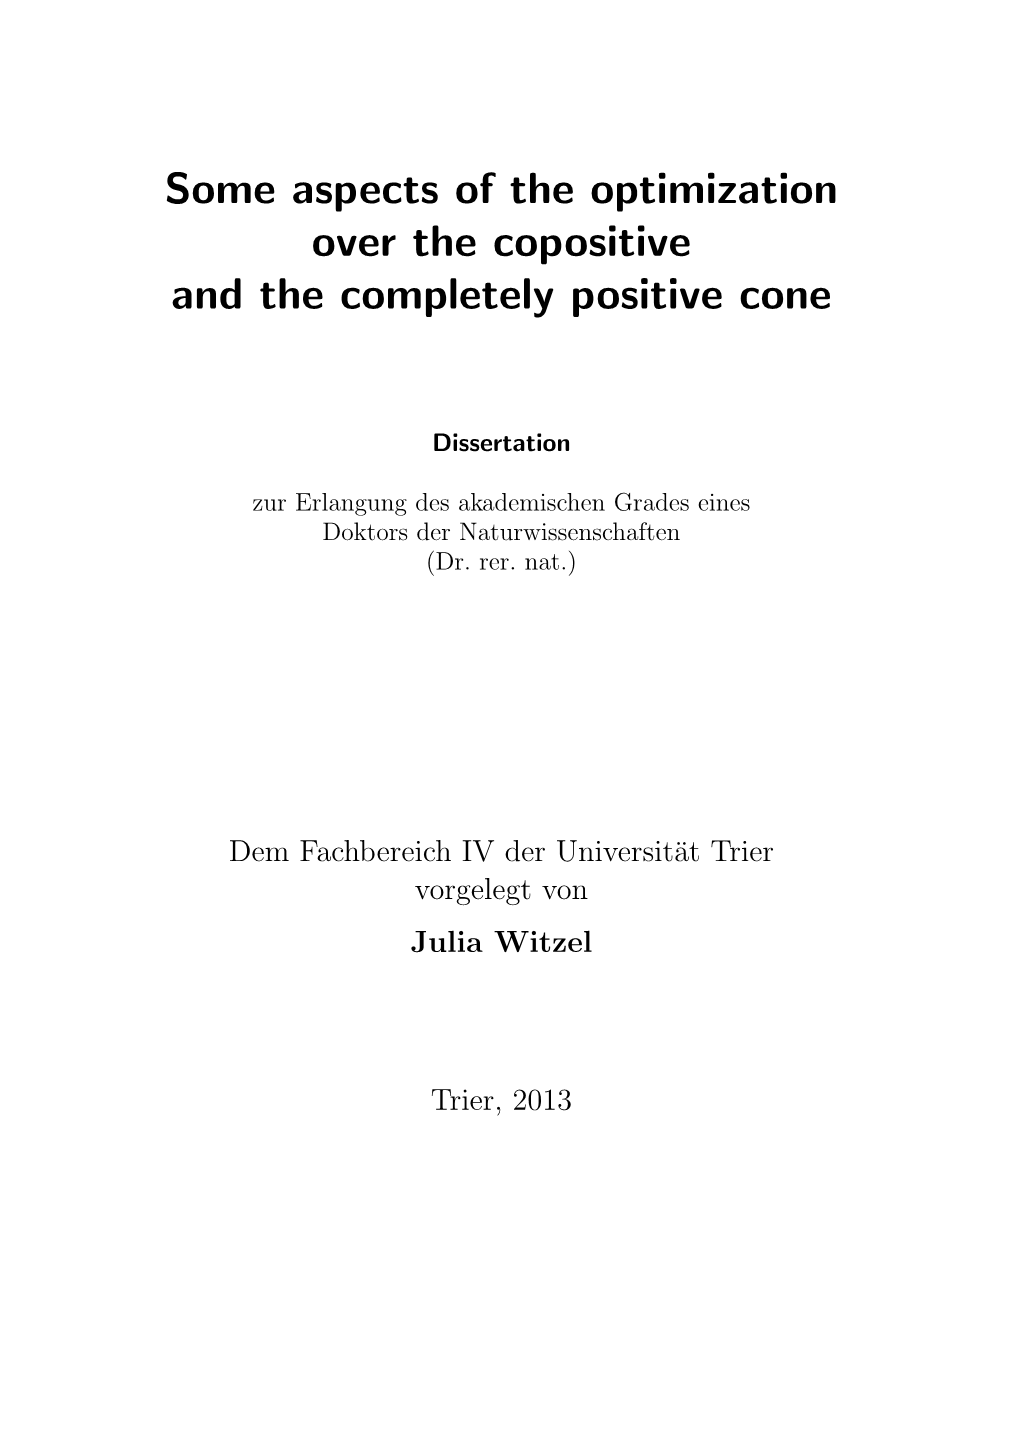 Some Aspects of the Optimization Over the Copositive and the Completely Positive Cone